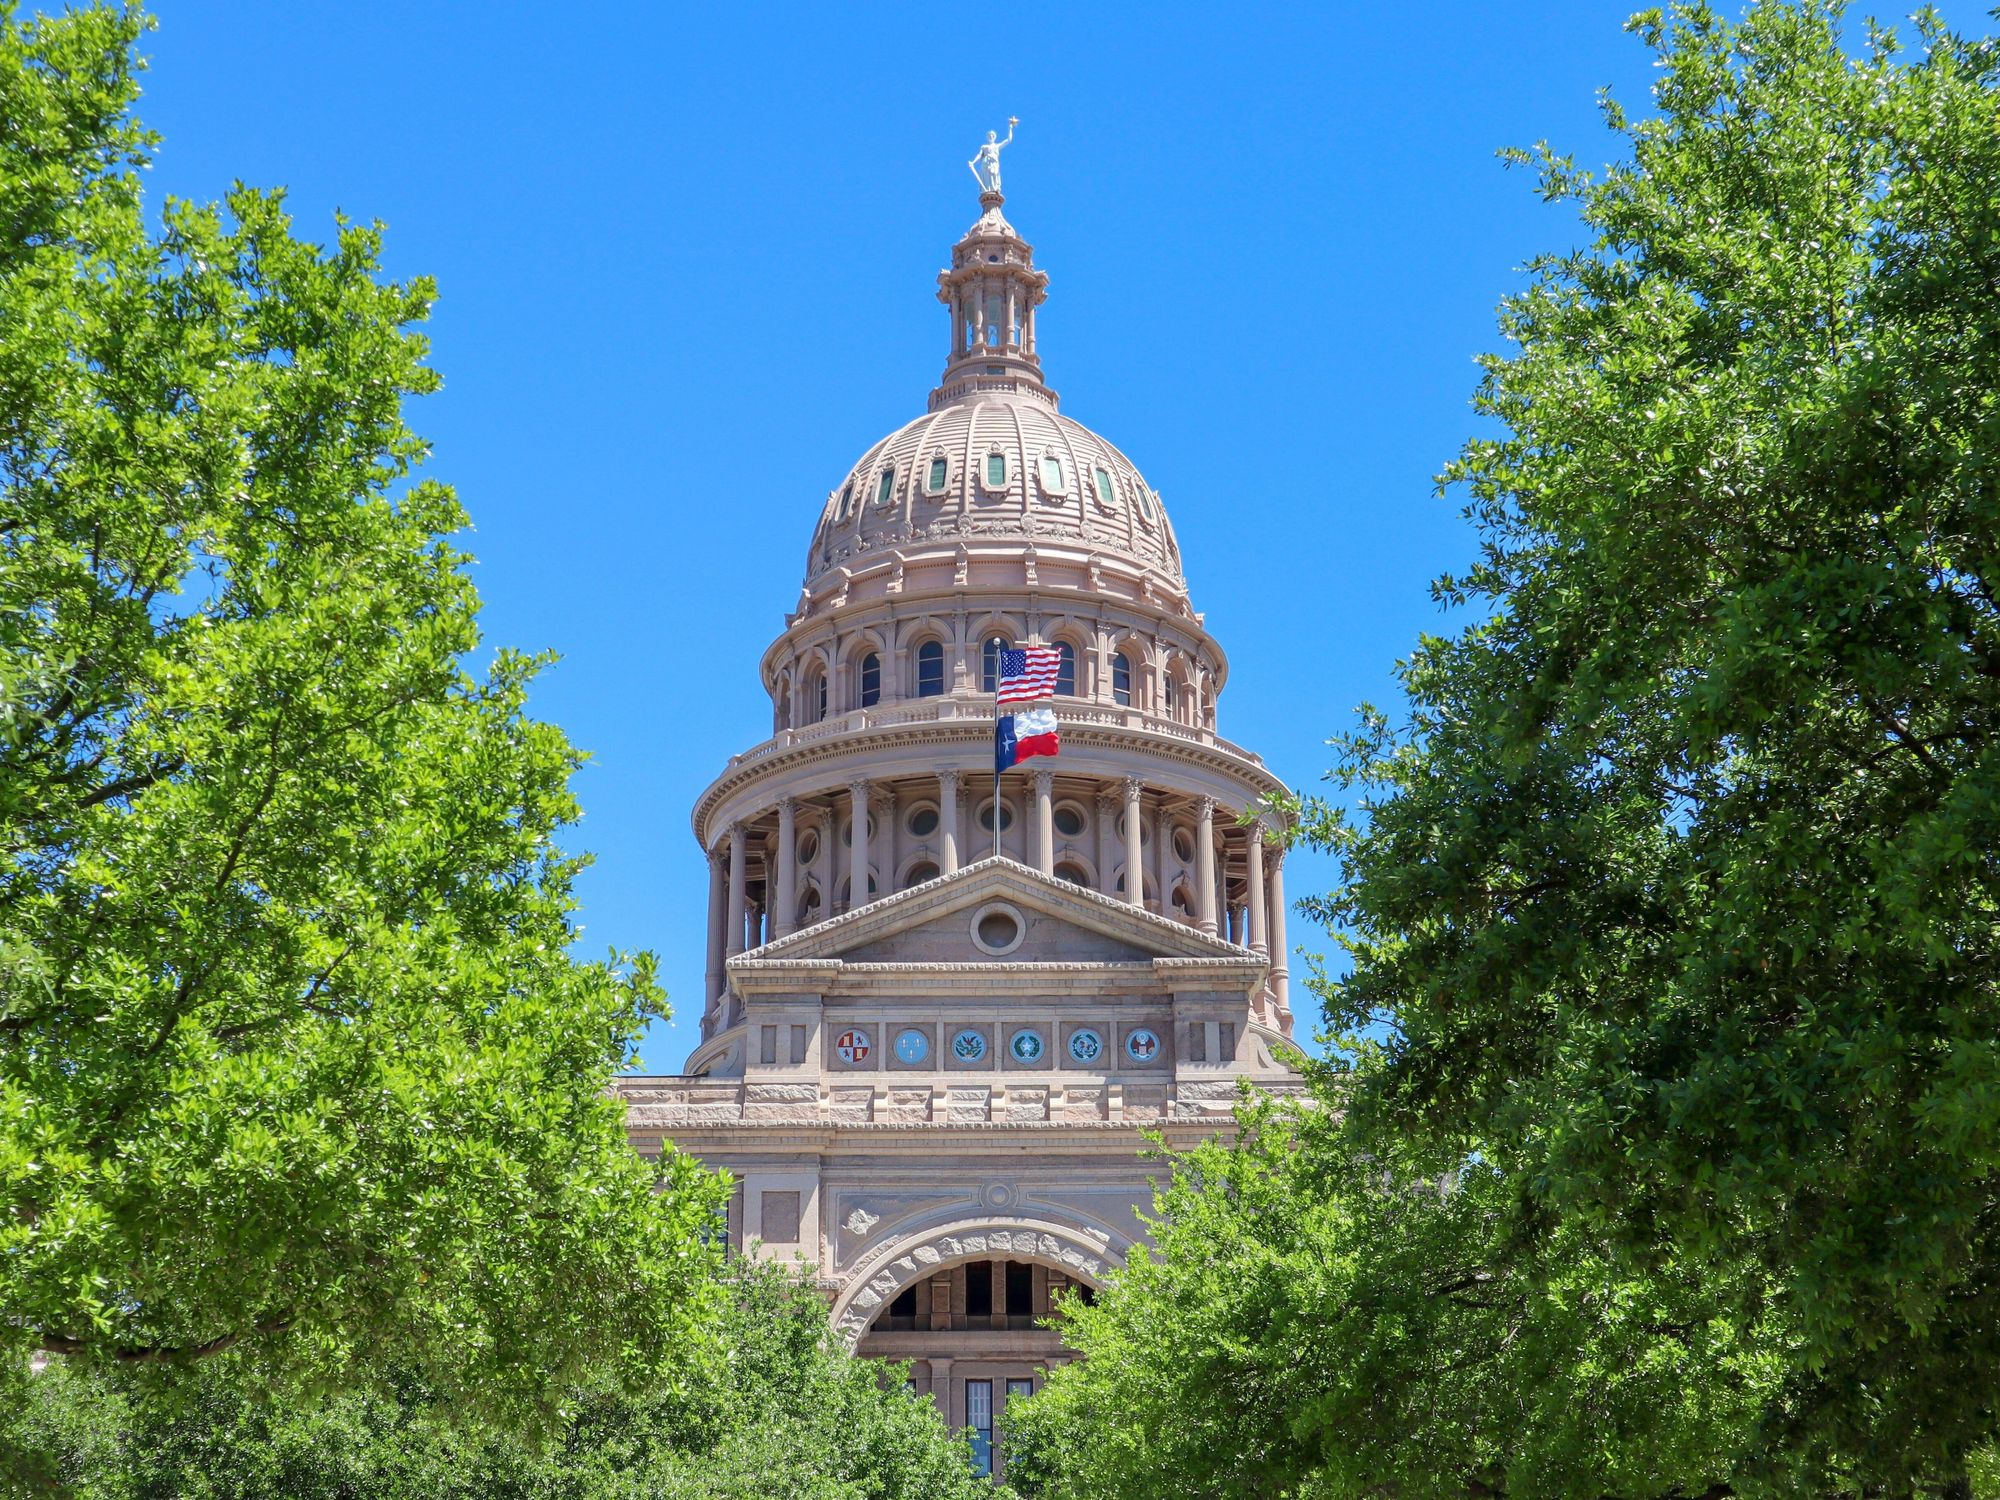 Texas Capital, State Capitol building